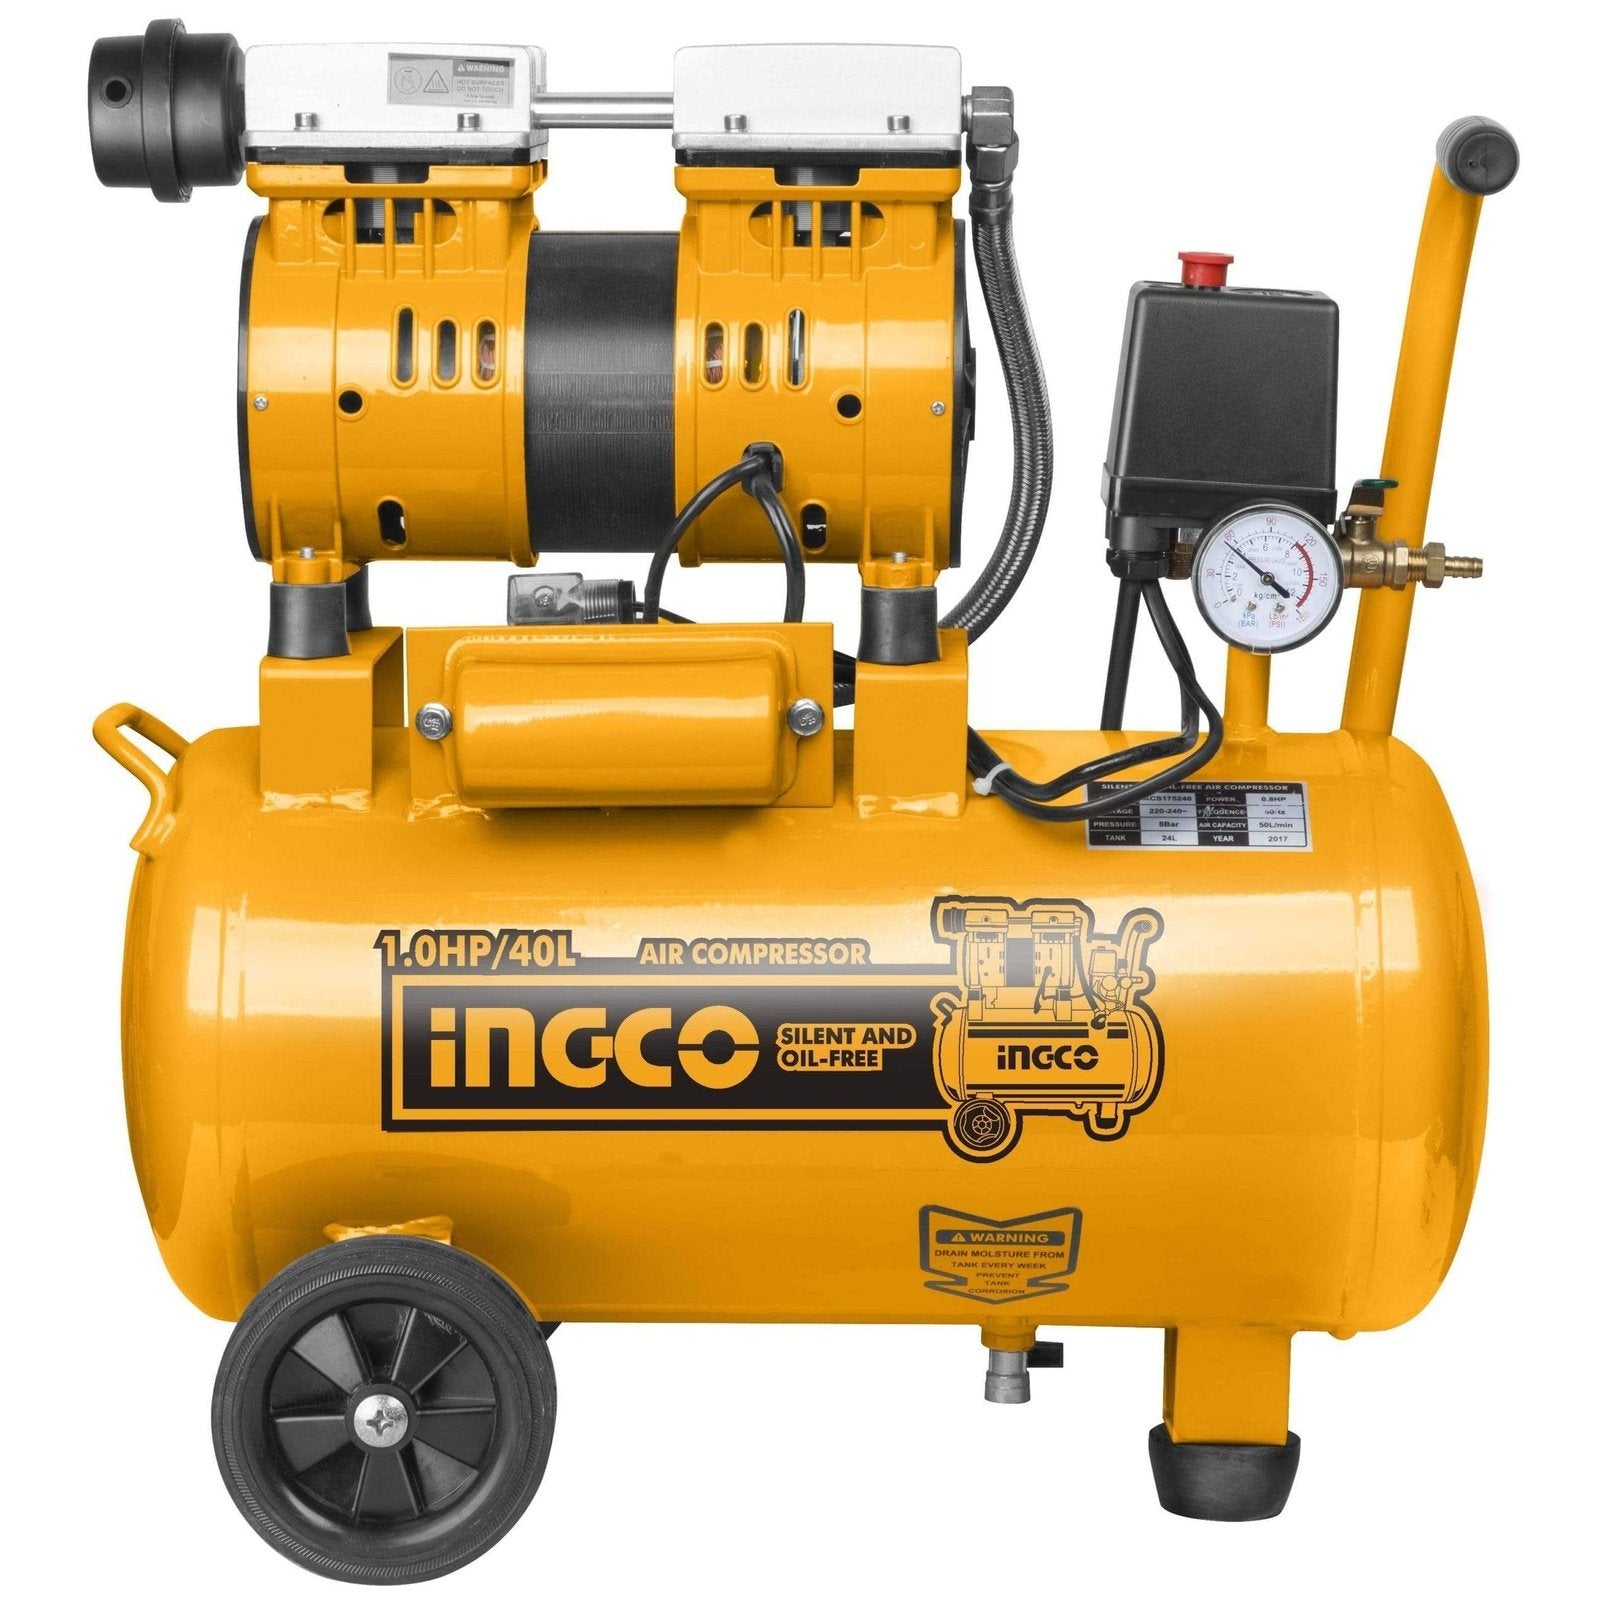 Ingco Silent And Oil Free Air Compressor 1.0HP 40L - ACS175406 | Supply Master | Accra, Ghana Tools Building Steel Engineering Hardware tool